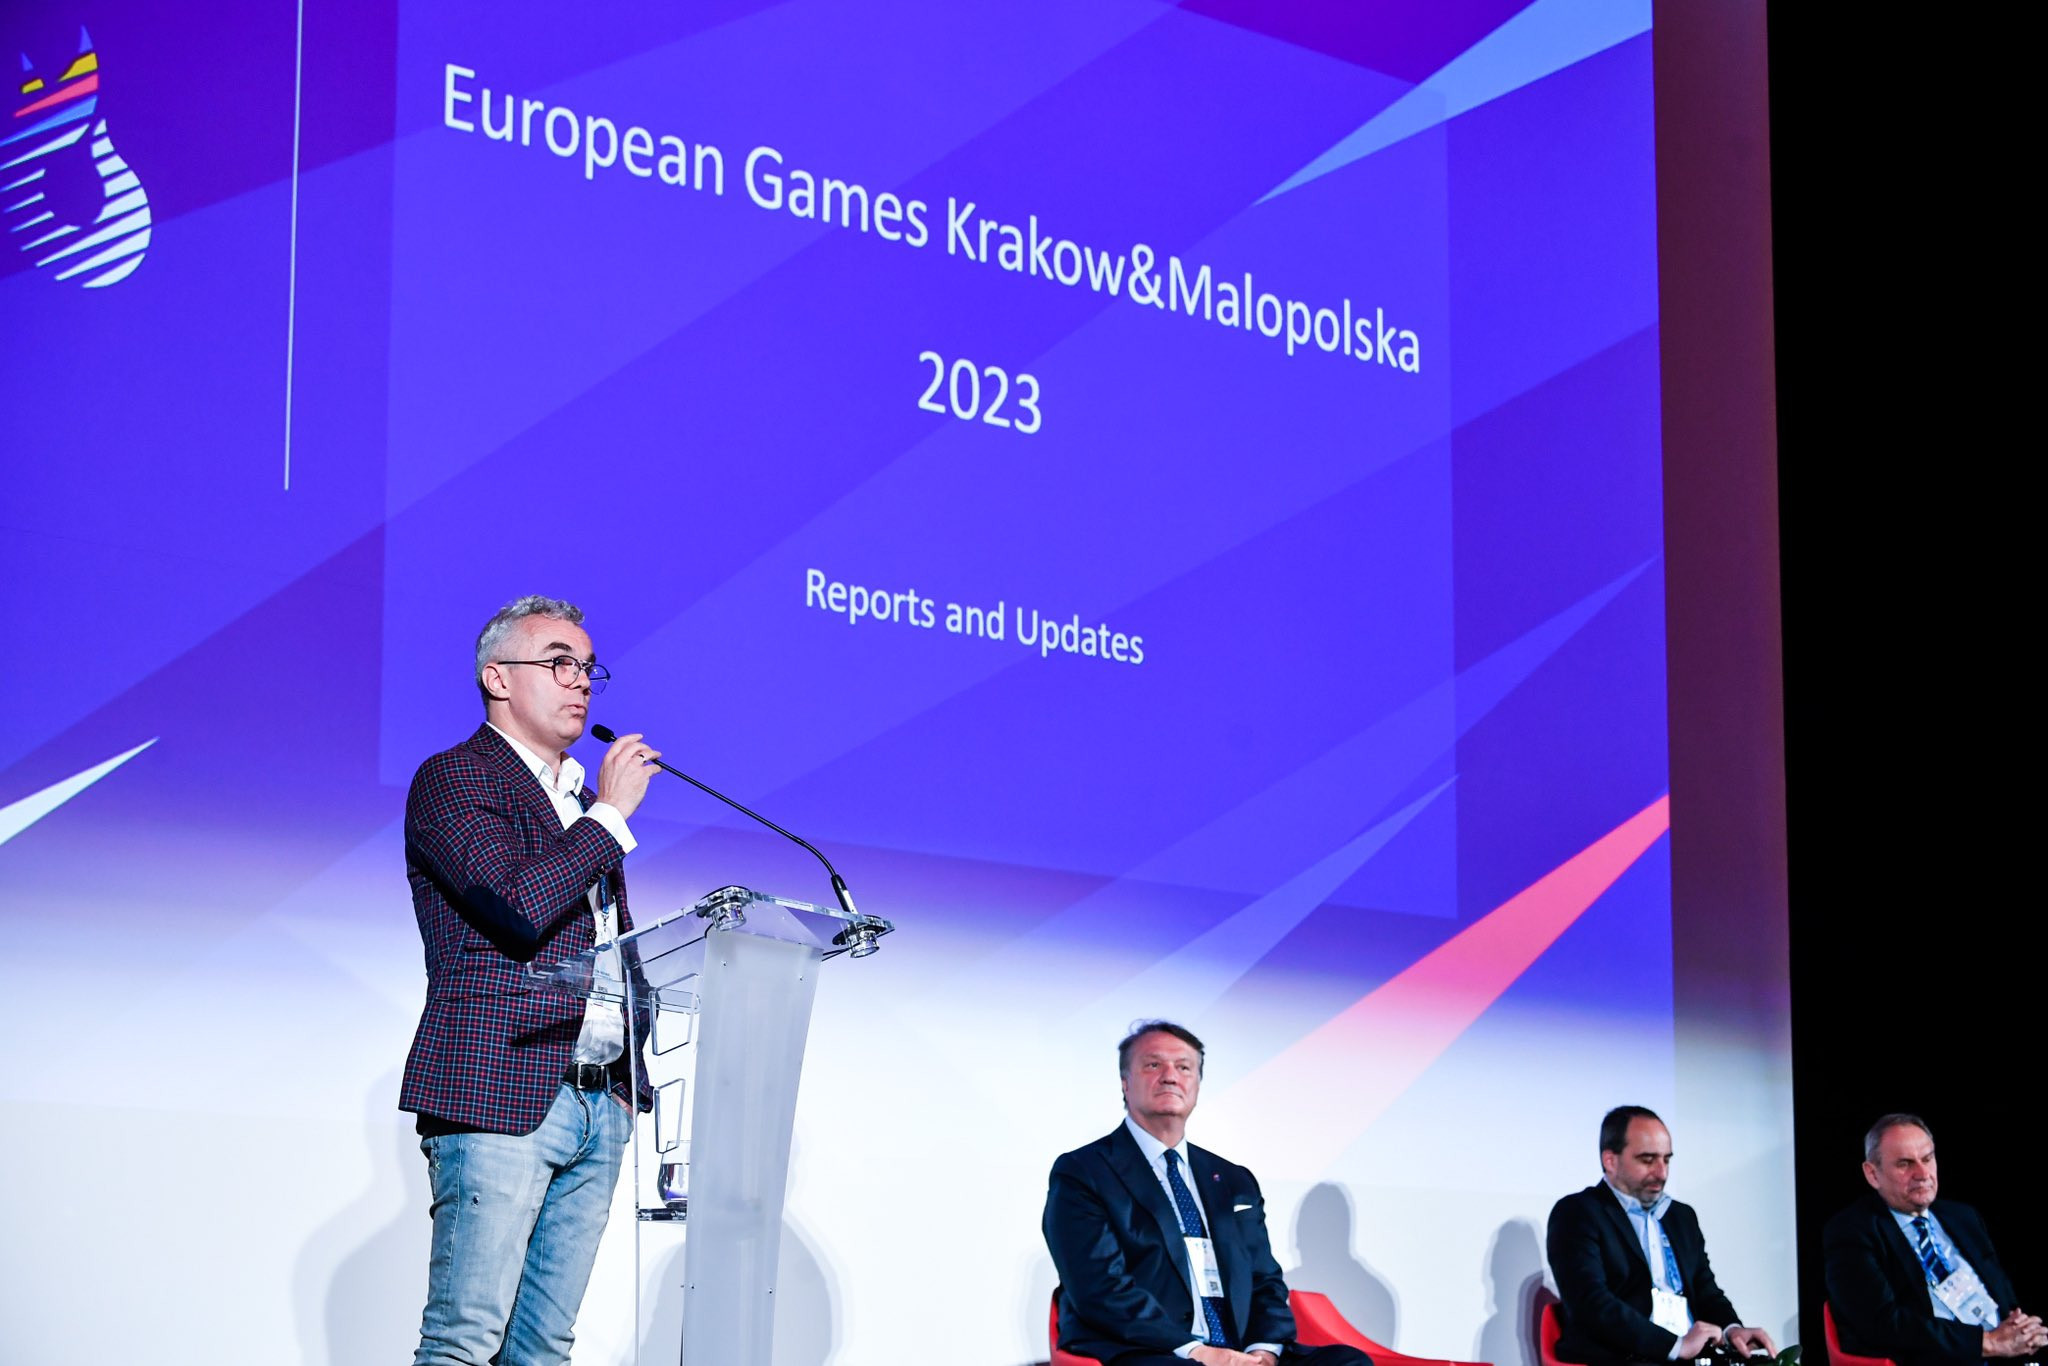 EOC considering changes to future European Games sports programming